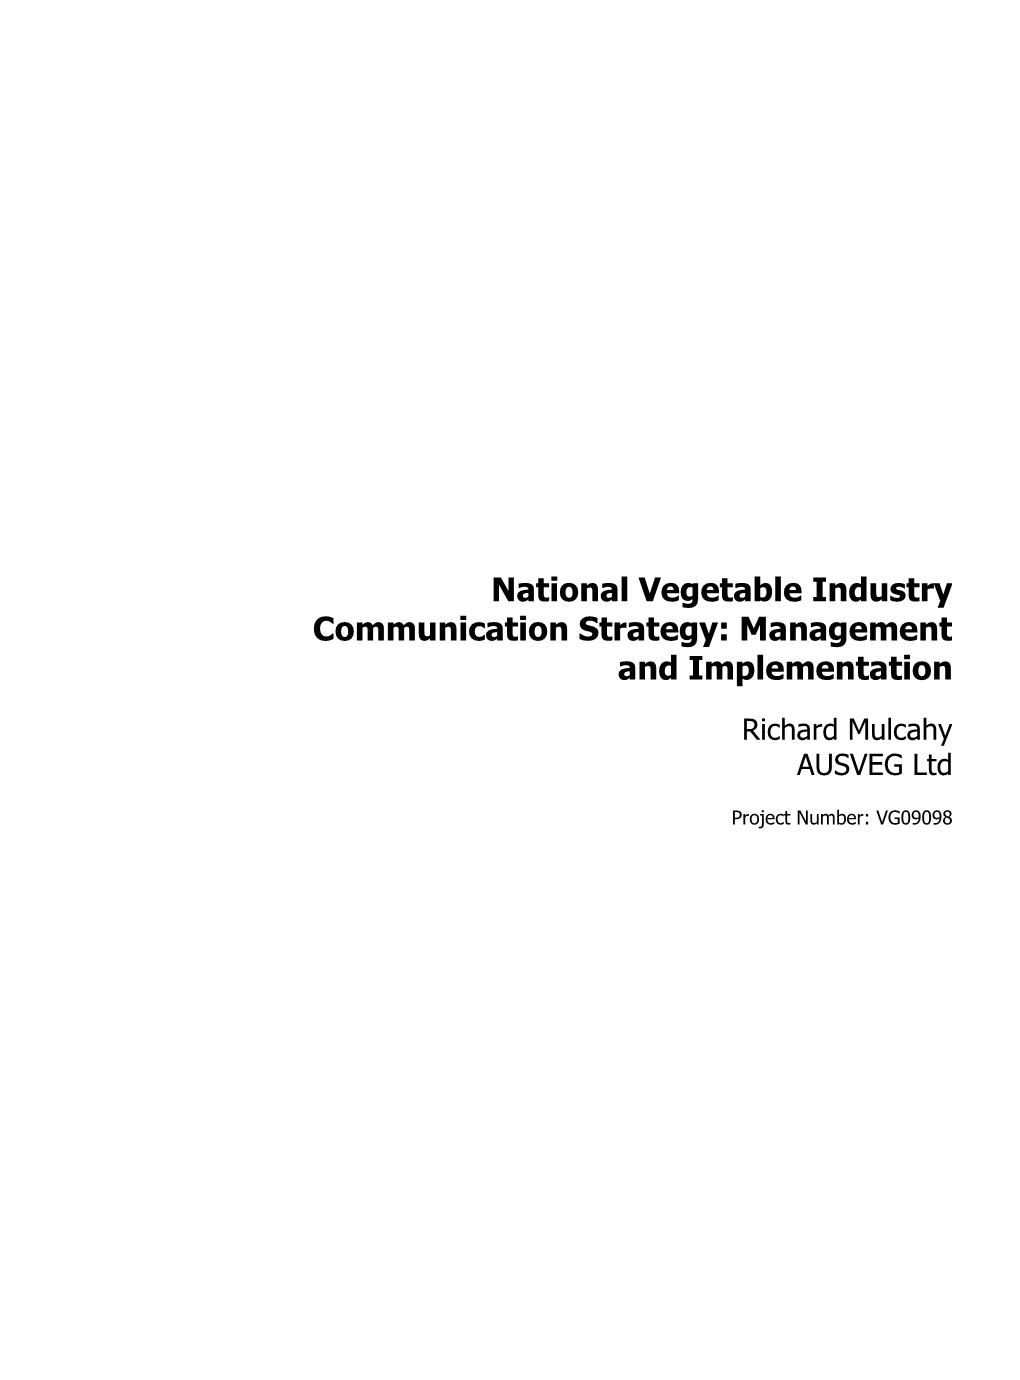 National Vegetable Industry Communication Strategy: Management and Implementation